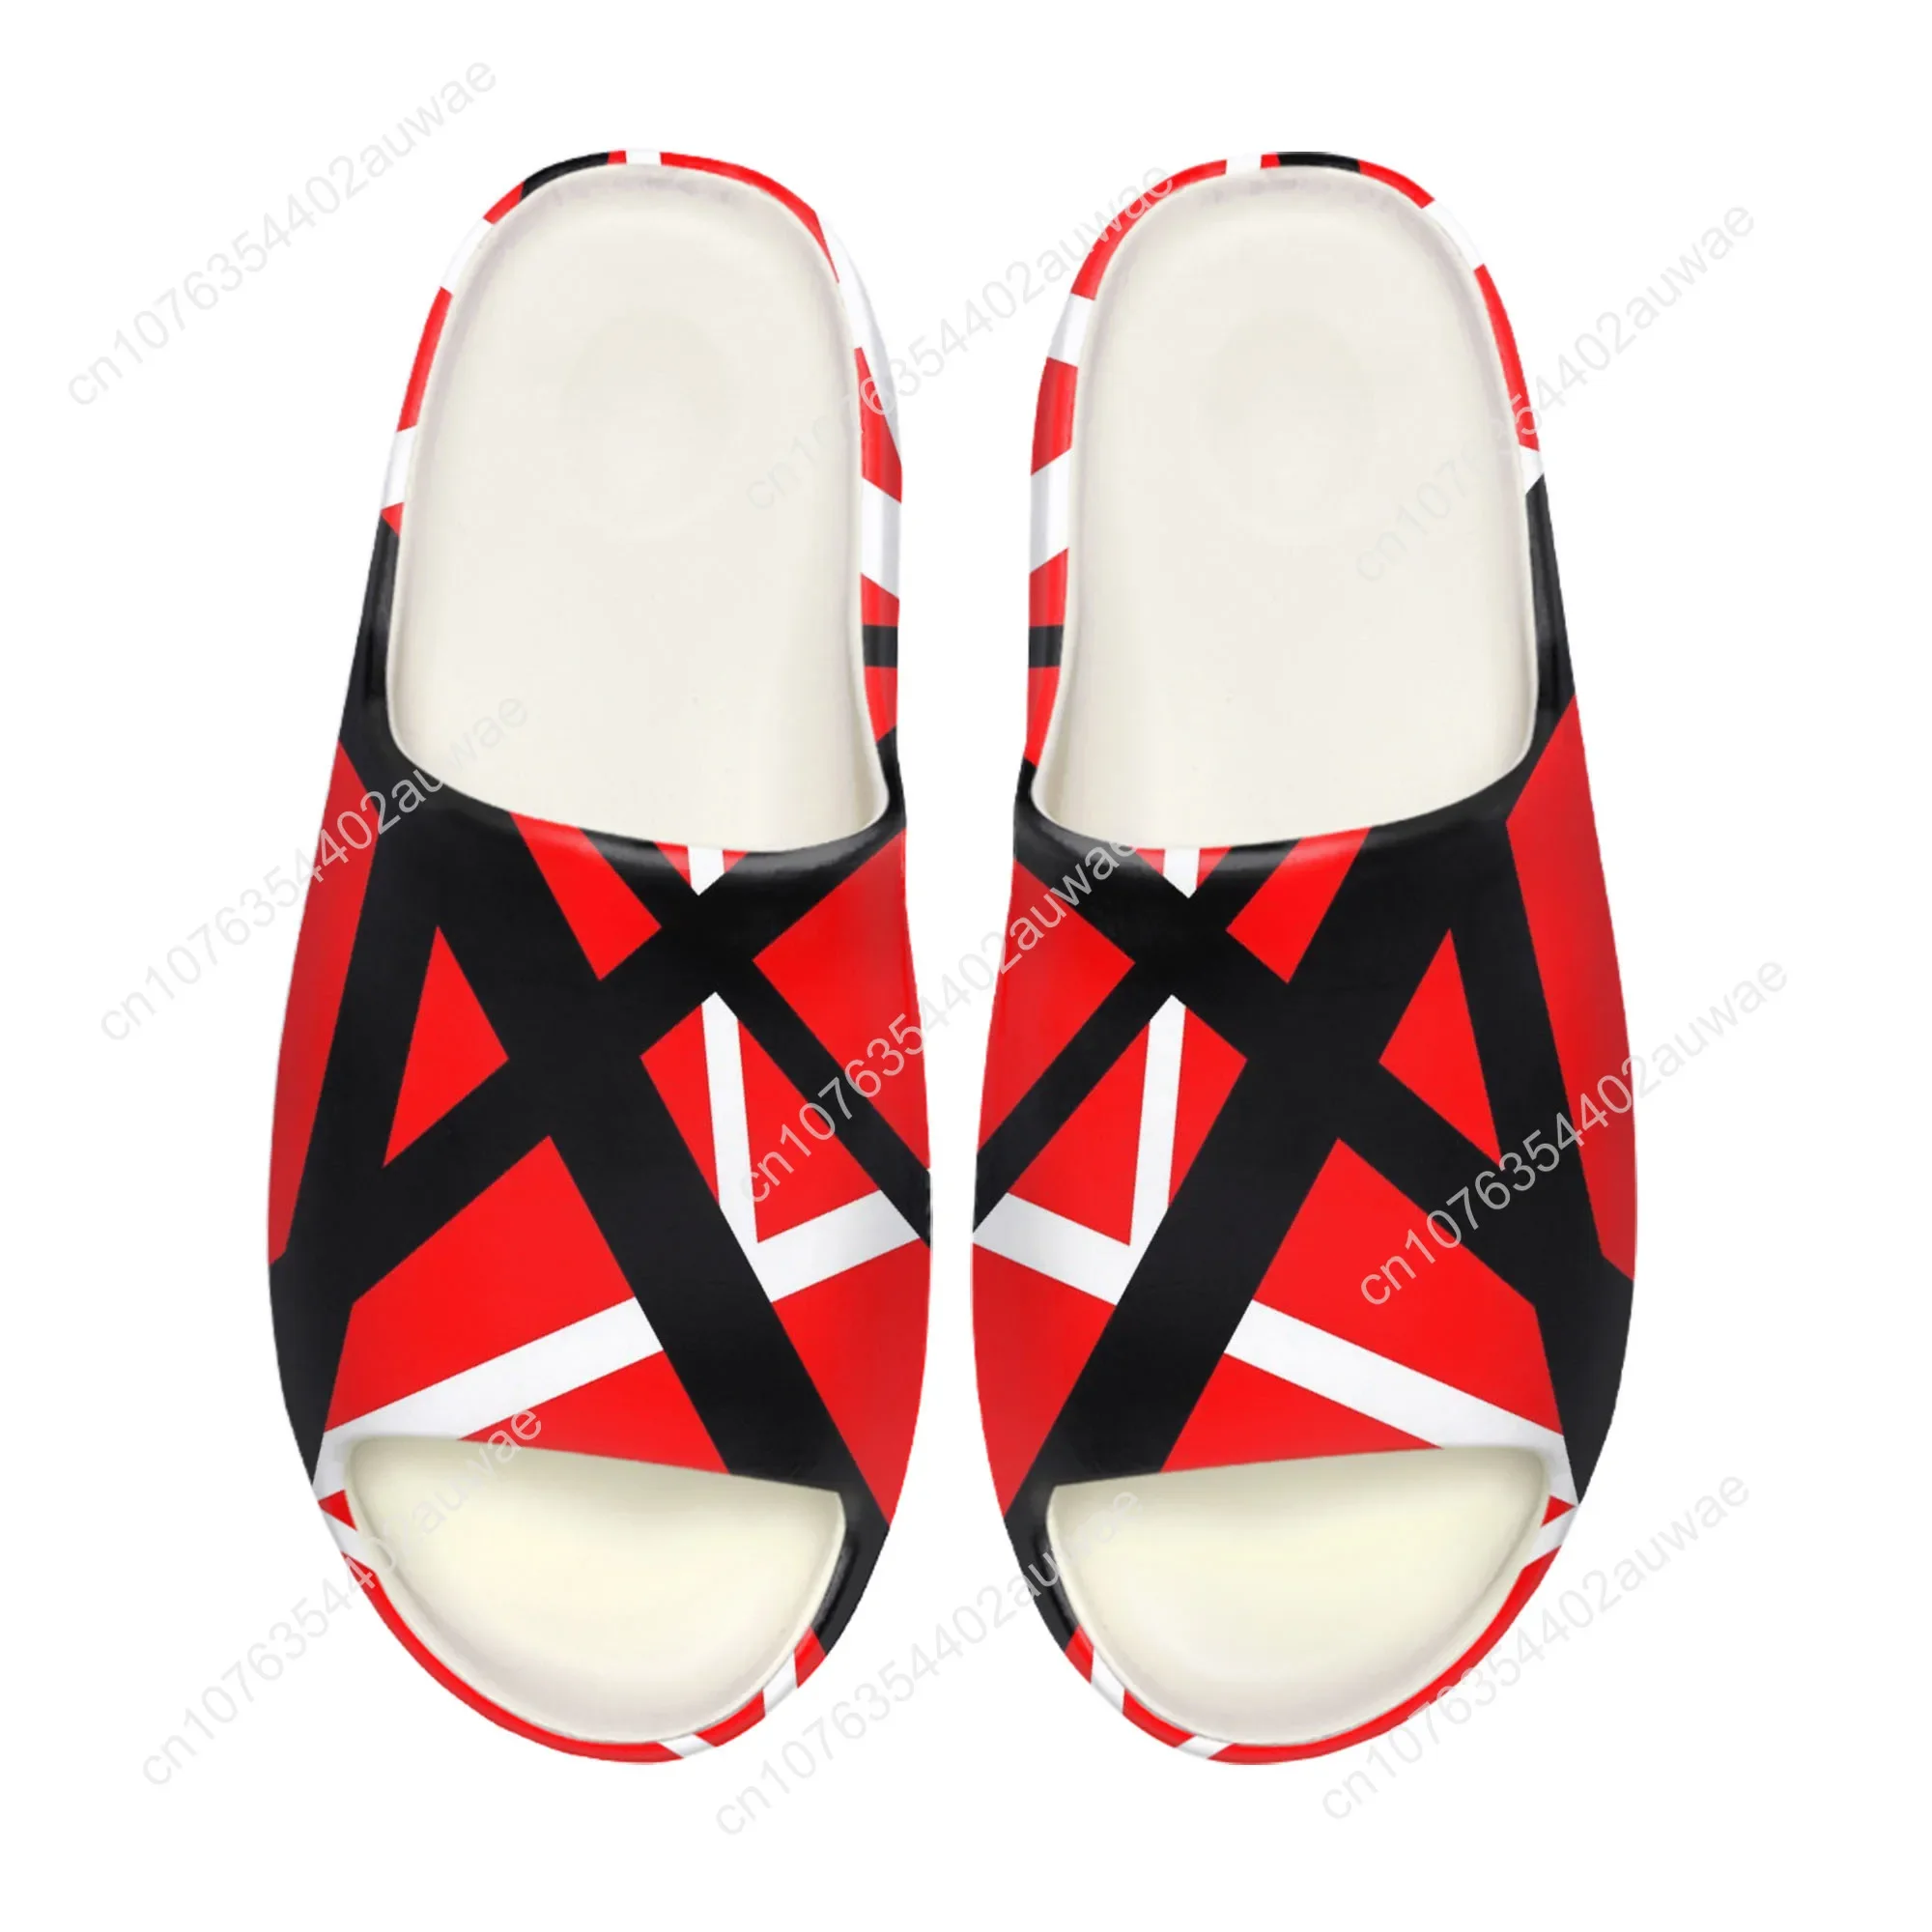 

Van Evh 1984 Stripes Halen Soft Sole Sllipers Home Clogs Step on Water Shoes Mens Womens Teenager 5150 Customize on Shit Sandals